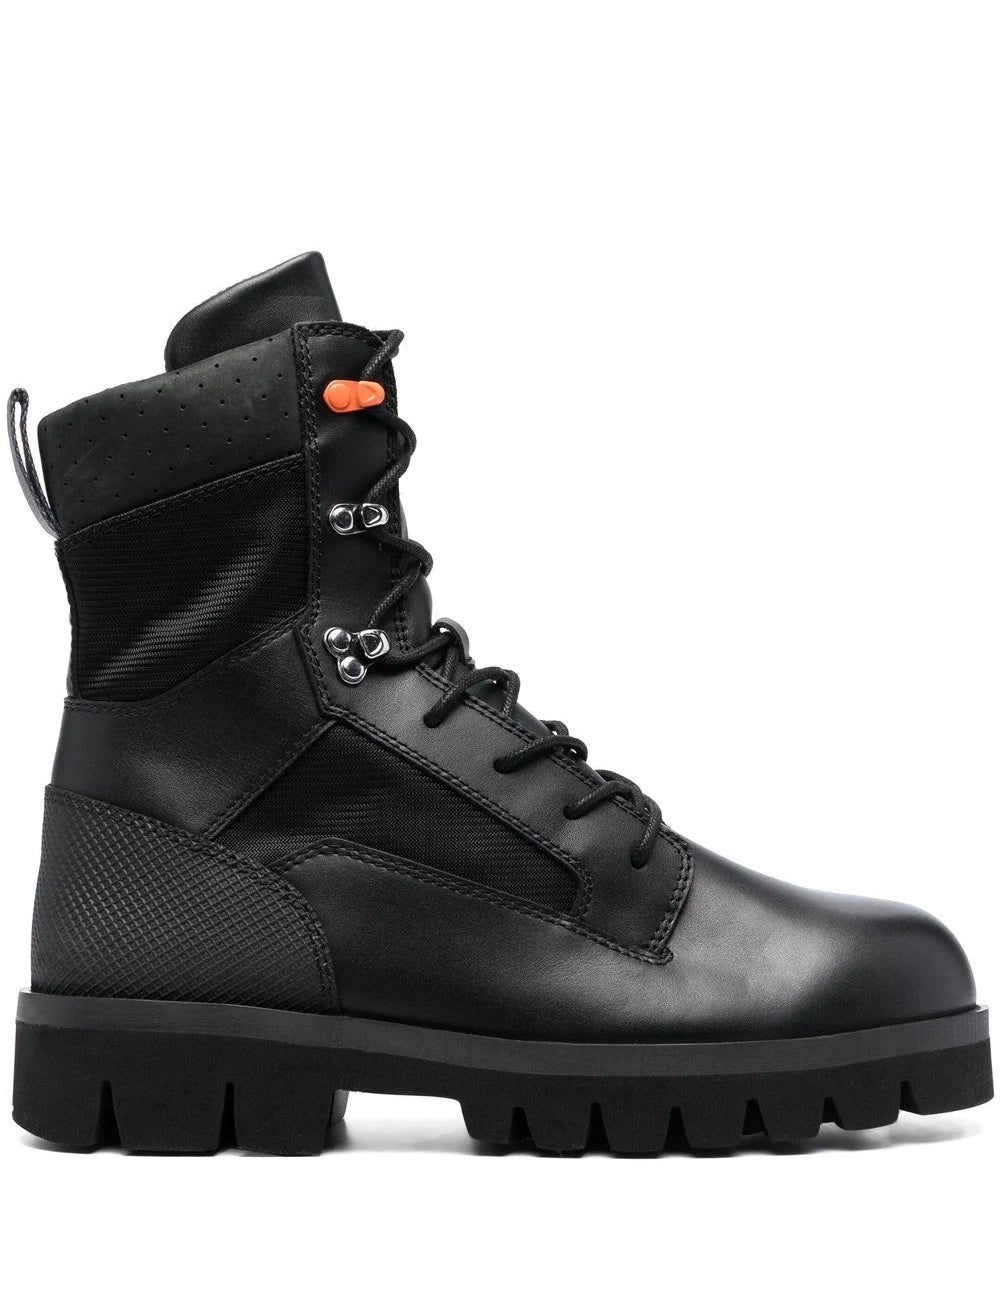 military-boots.jpg